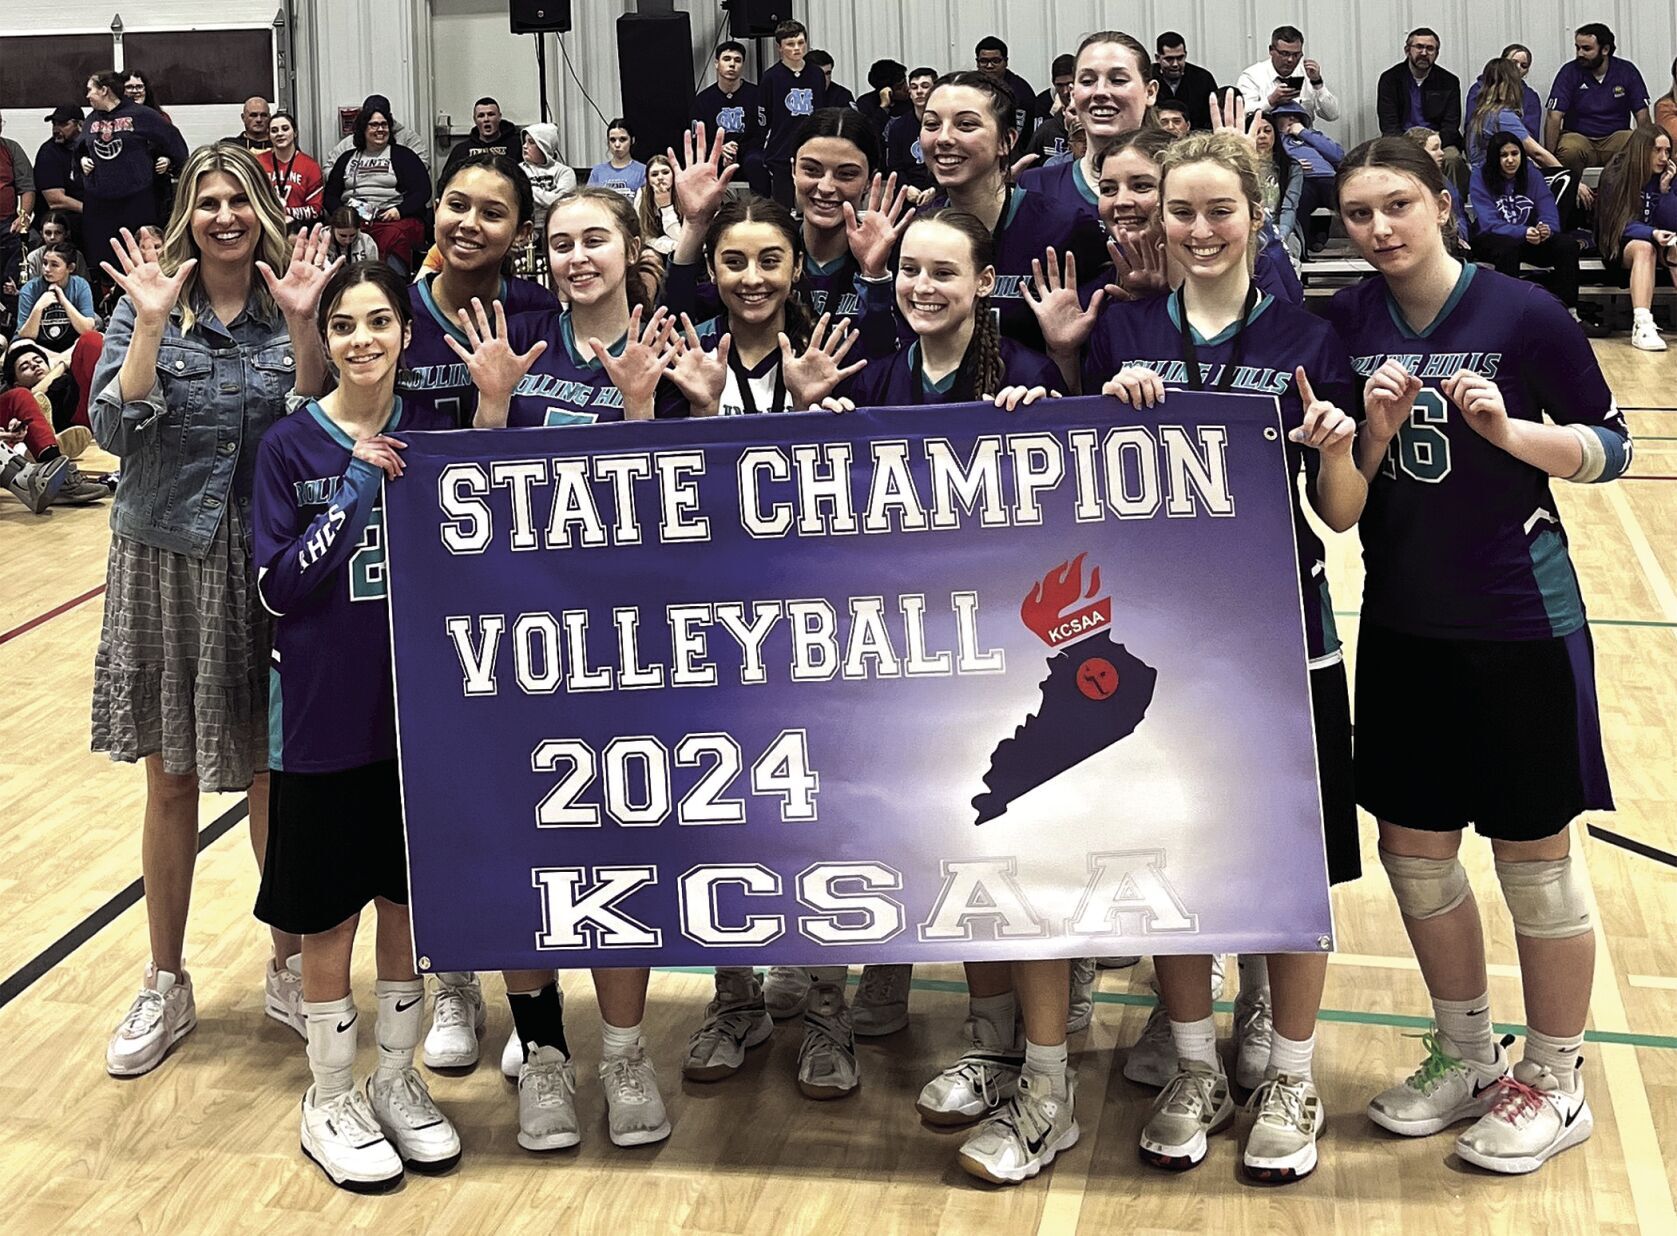 Rolling Hills Christian Academy Claims 10th State Volleyball Title Amid School Closure